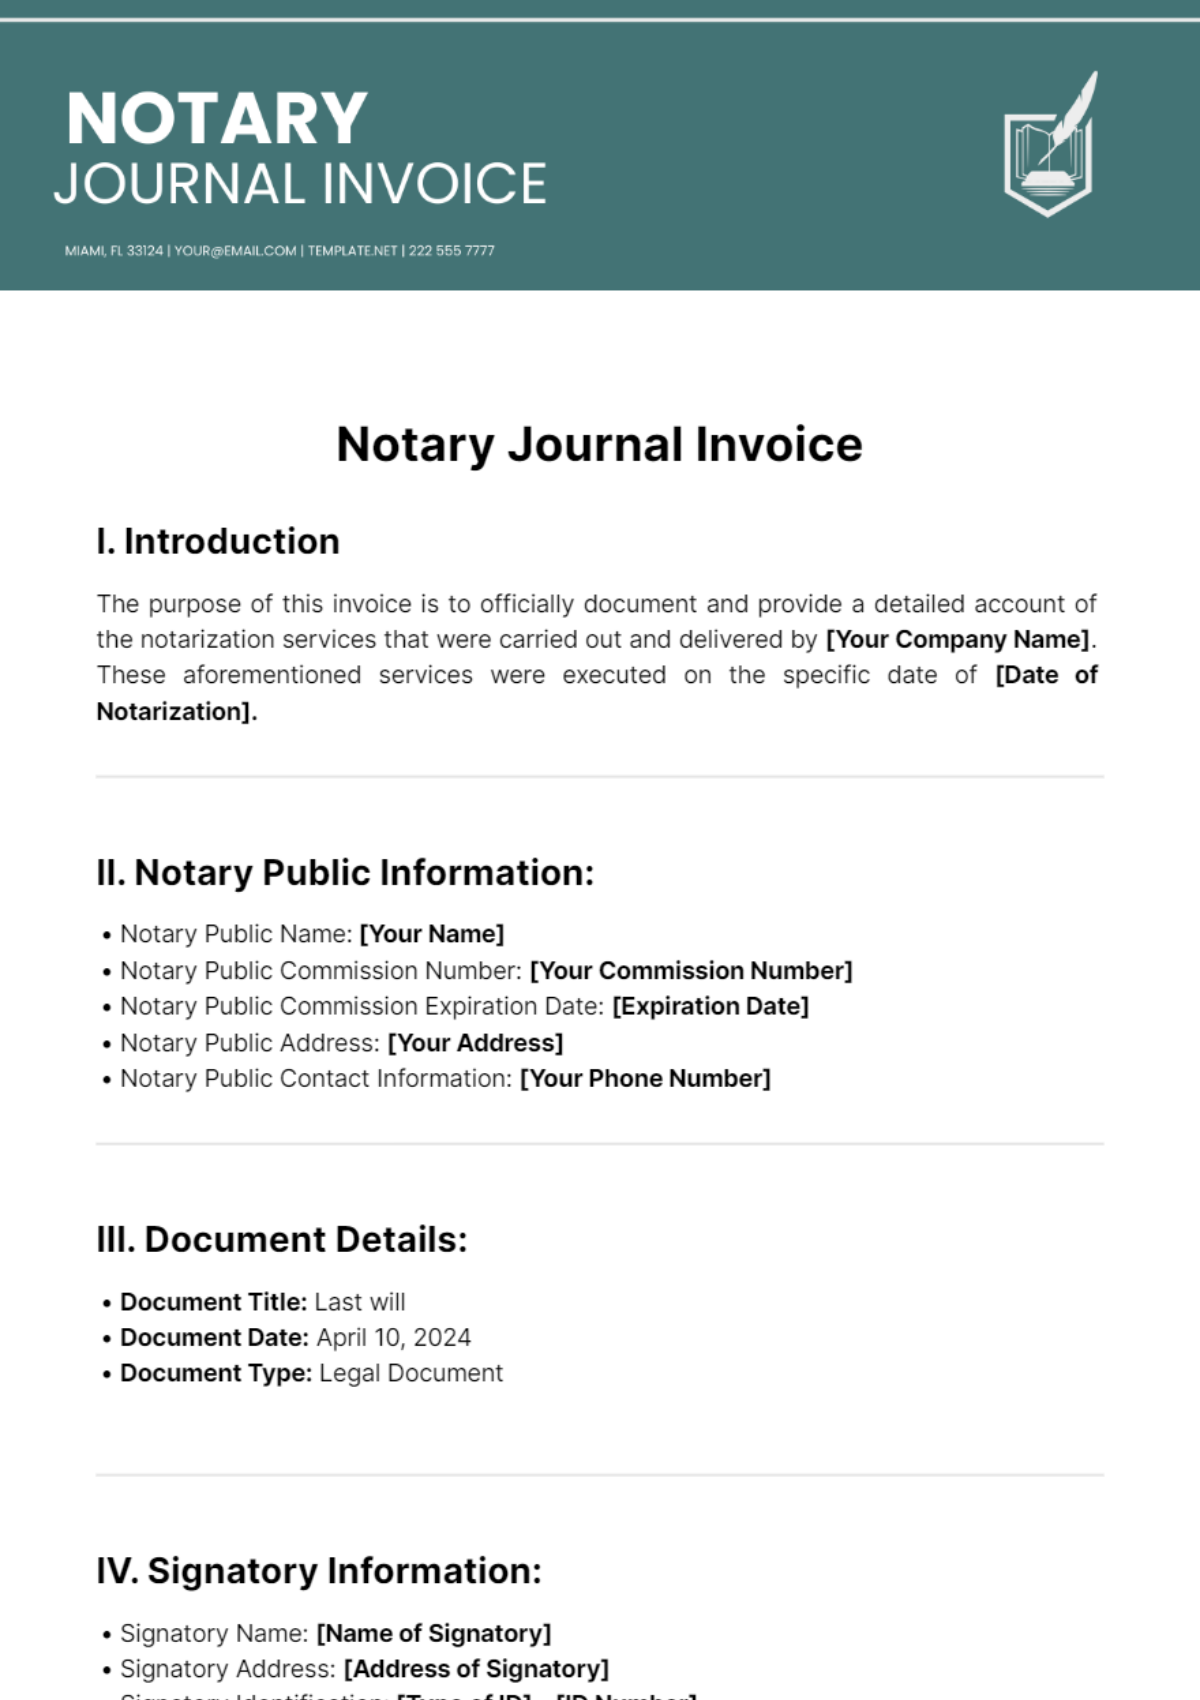 Notary Journal Invoice Template